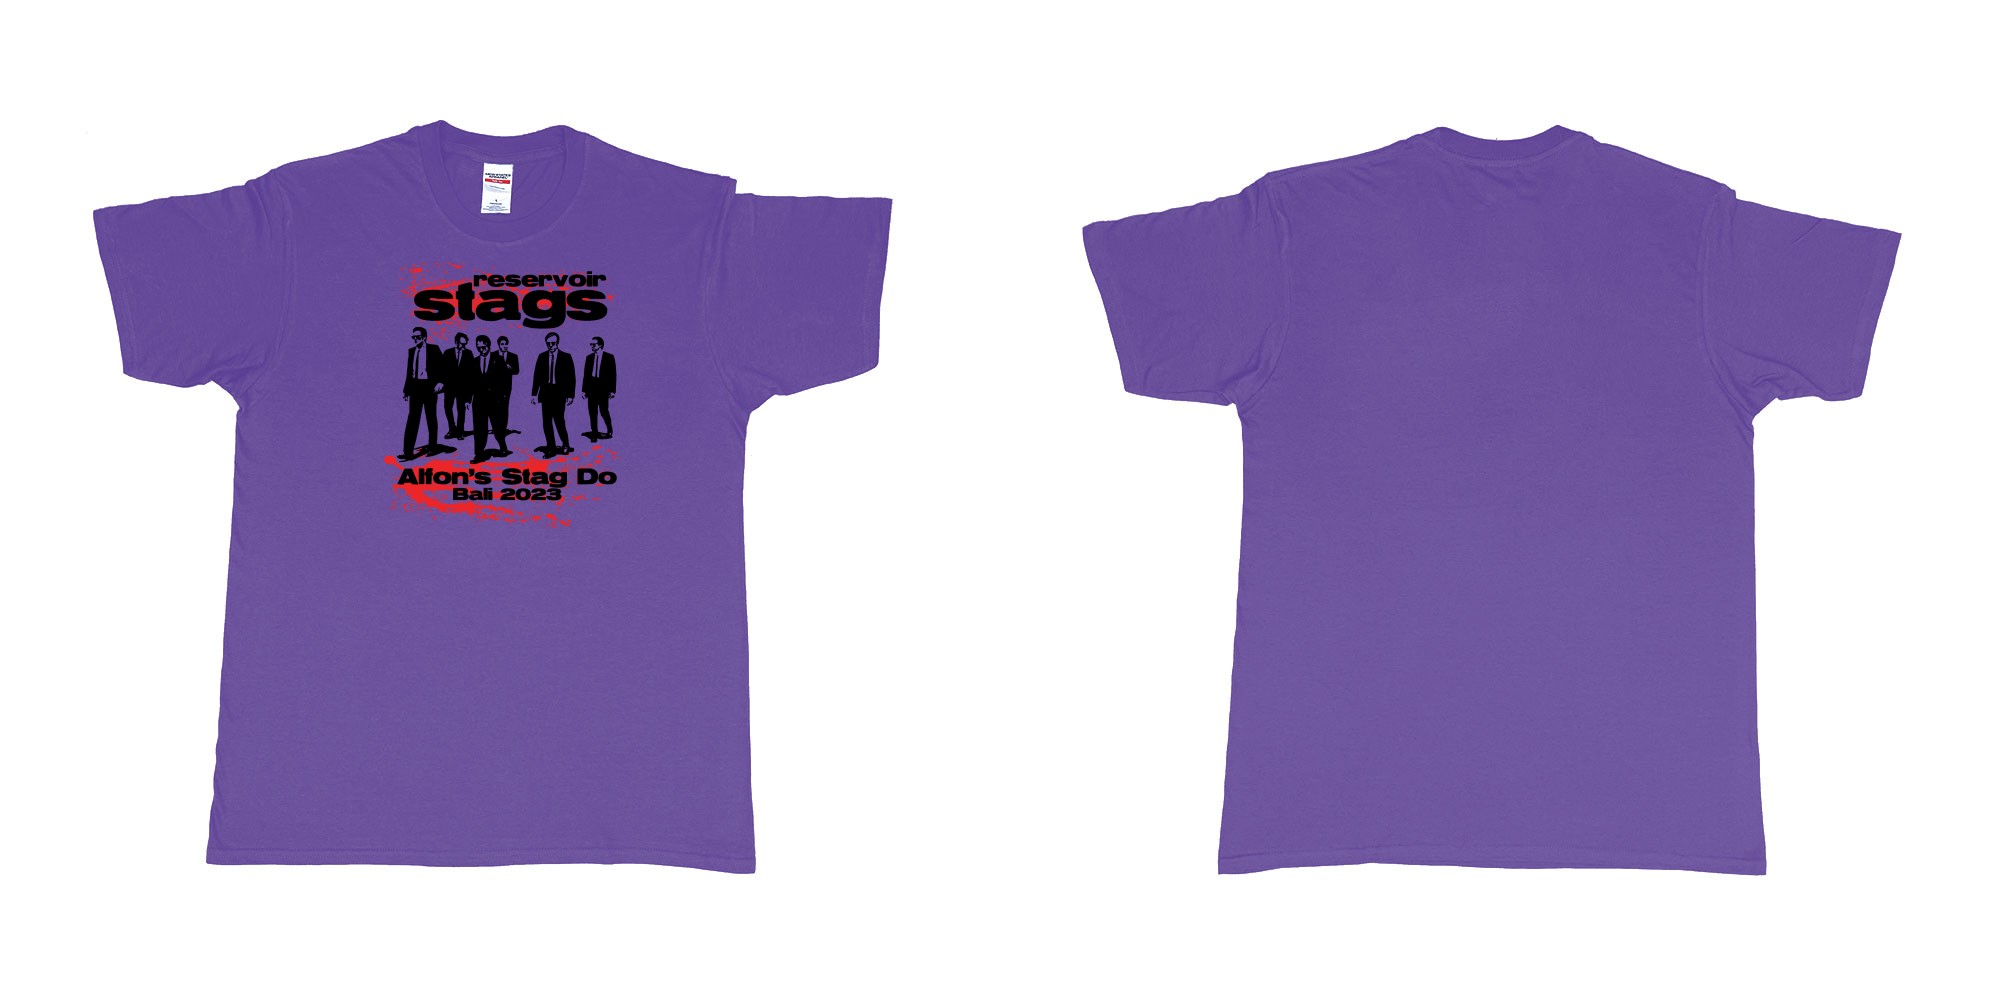 Custom tshirt design Reservoir Dogs Stag in fabric color purple choice your own text made in Bali by The Pirate Way